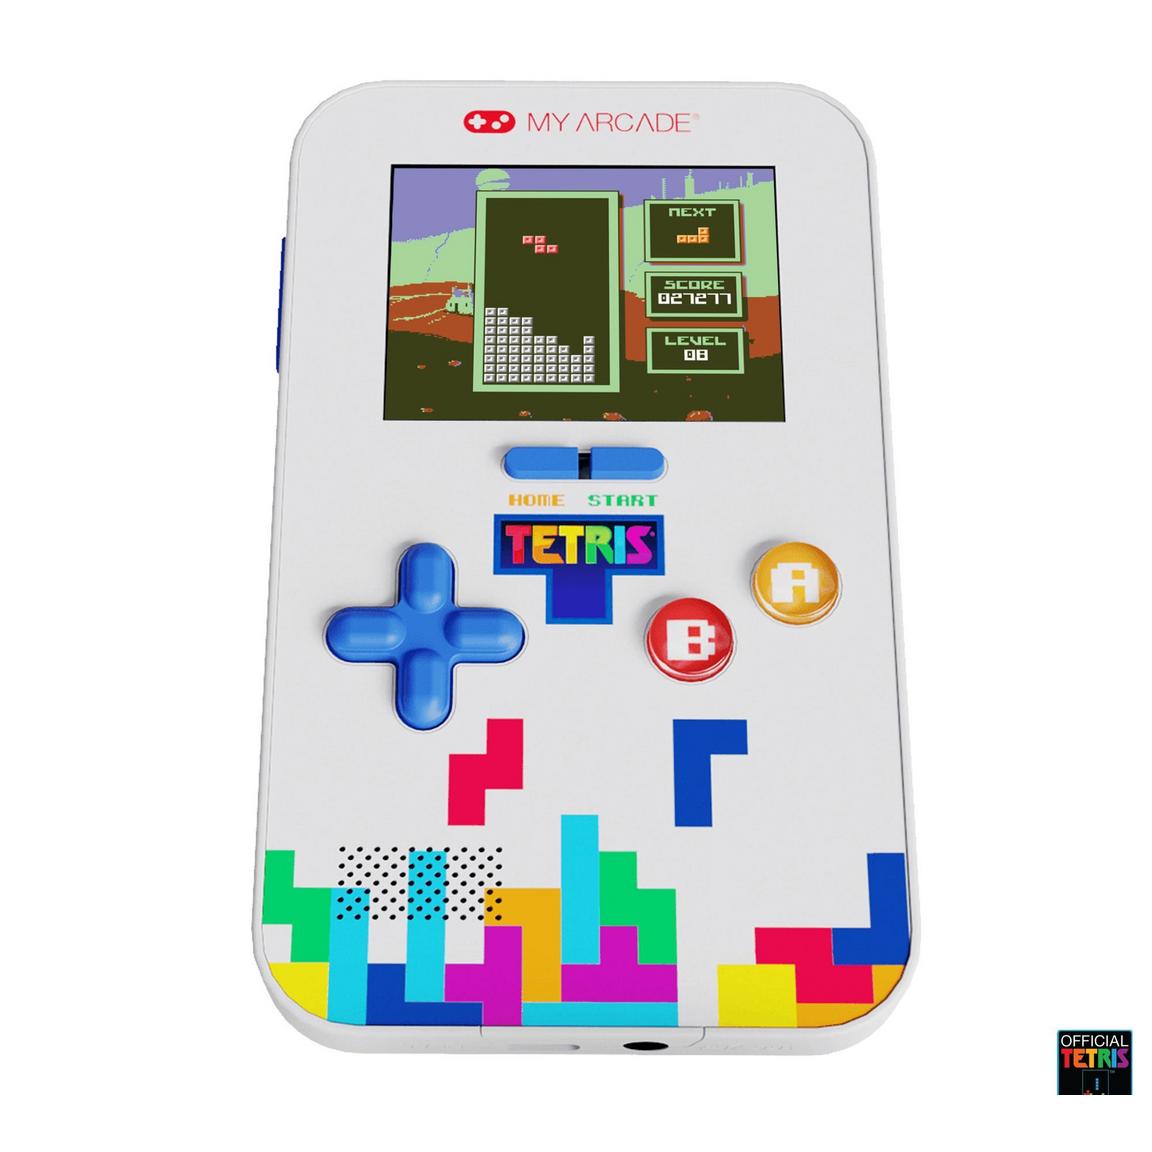 My Arcade TETRIS GO Gamer Classic Handheld Portable Video Game System with 301 Games